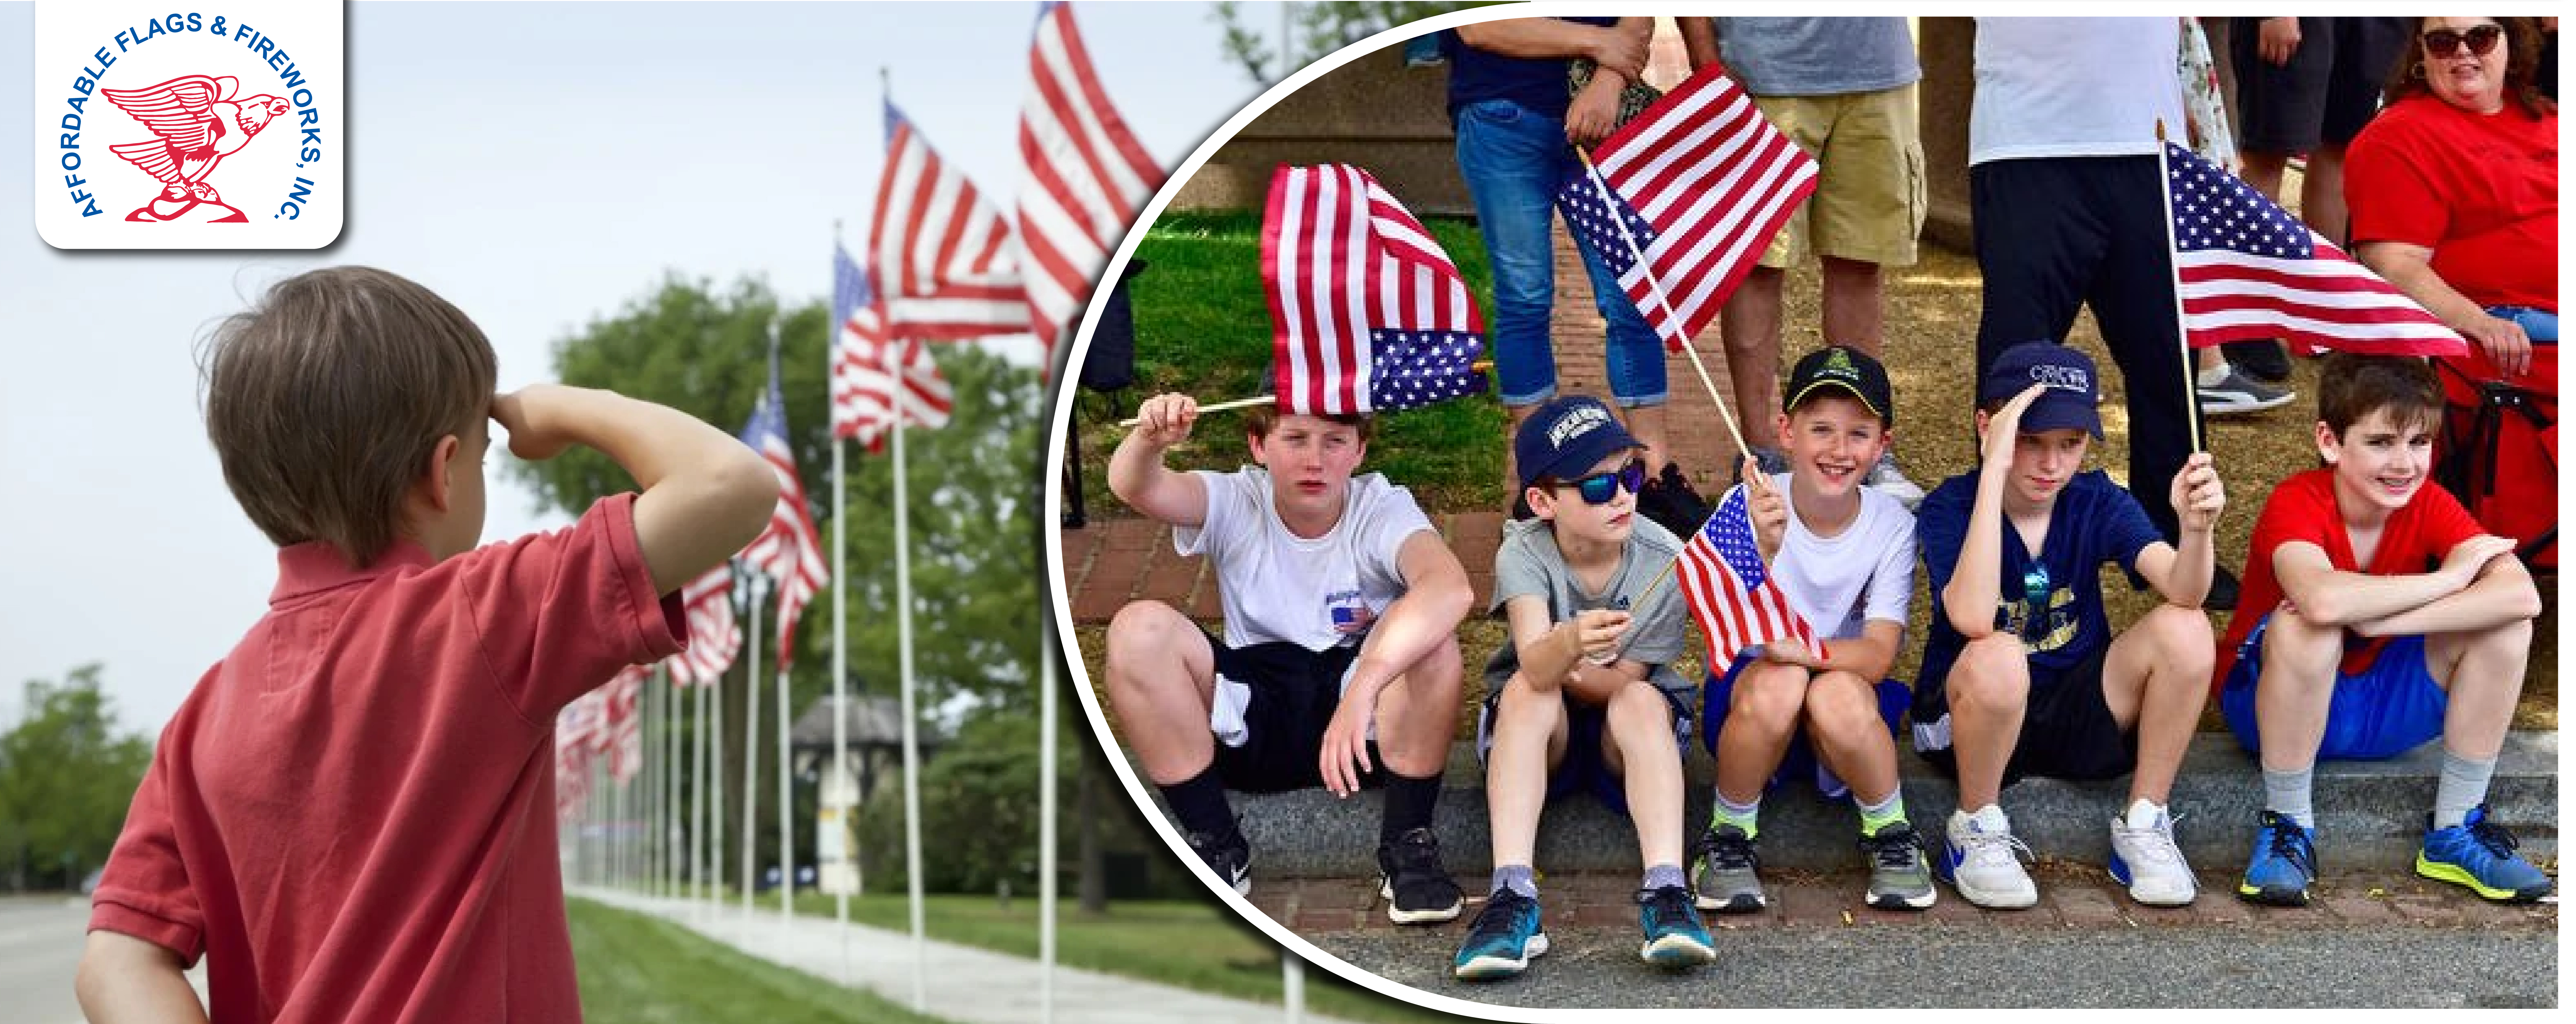 children-proudly-holding-US-national-flag-and-saluting-with-respect